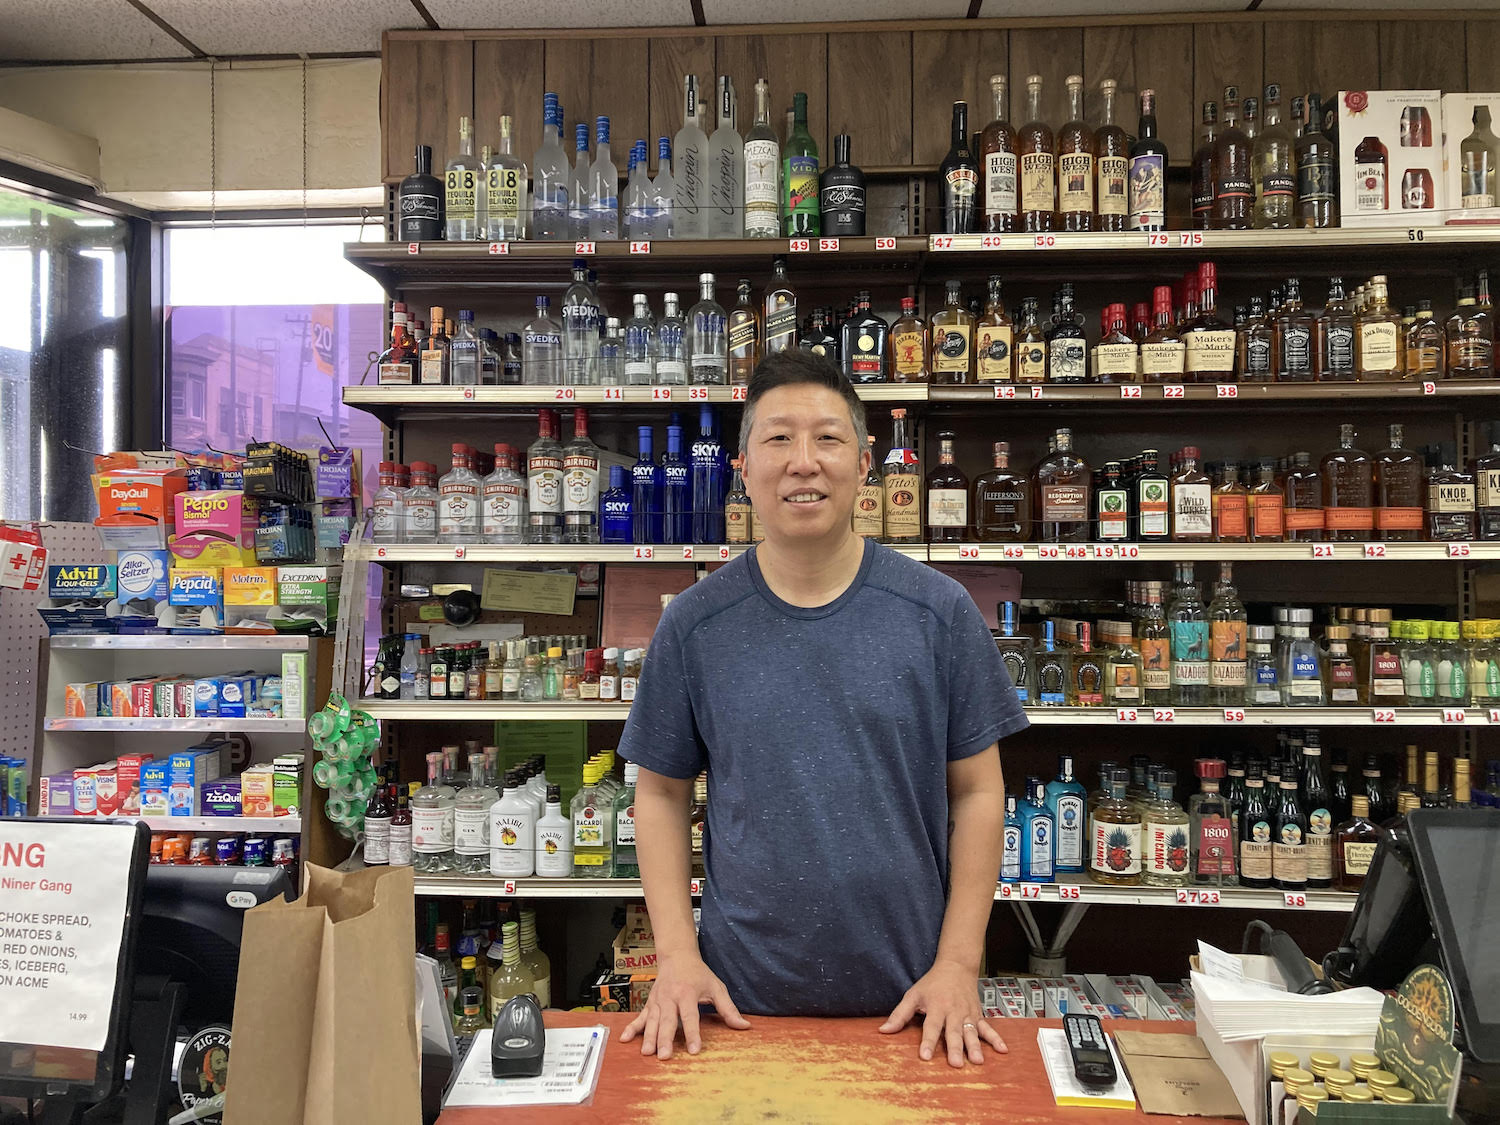 A man stands behind the counter of a mart, with shelves filled with various bottles of alcohol and other products in the background.